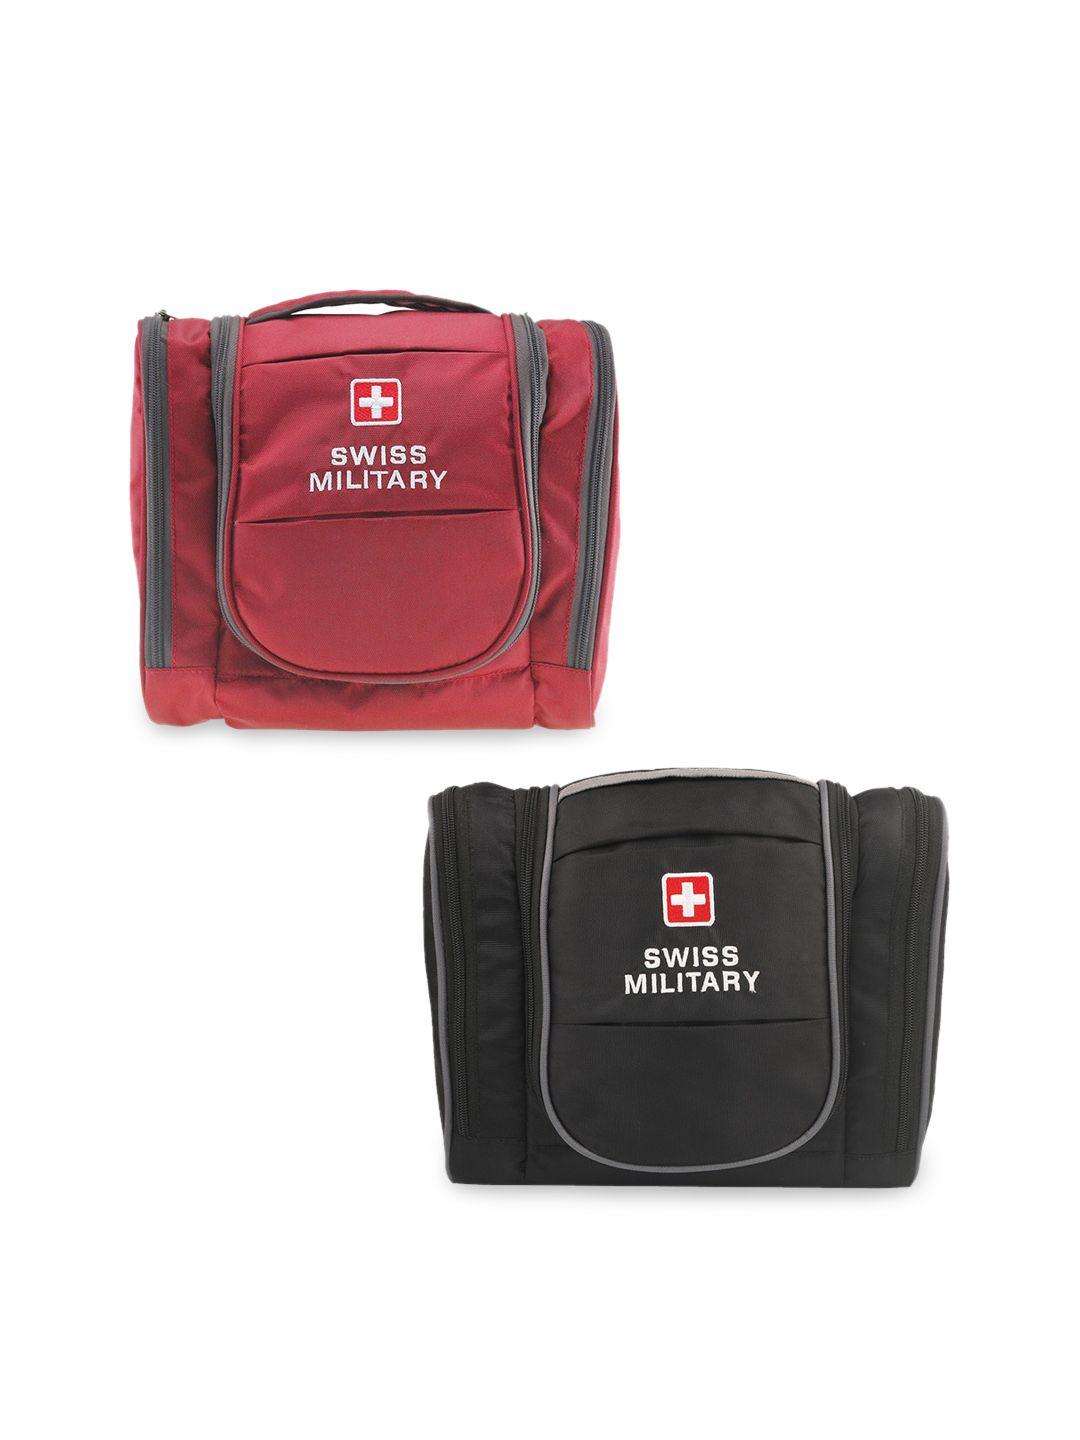 swiss military pack of 2 red and black toiletry bags